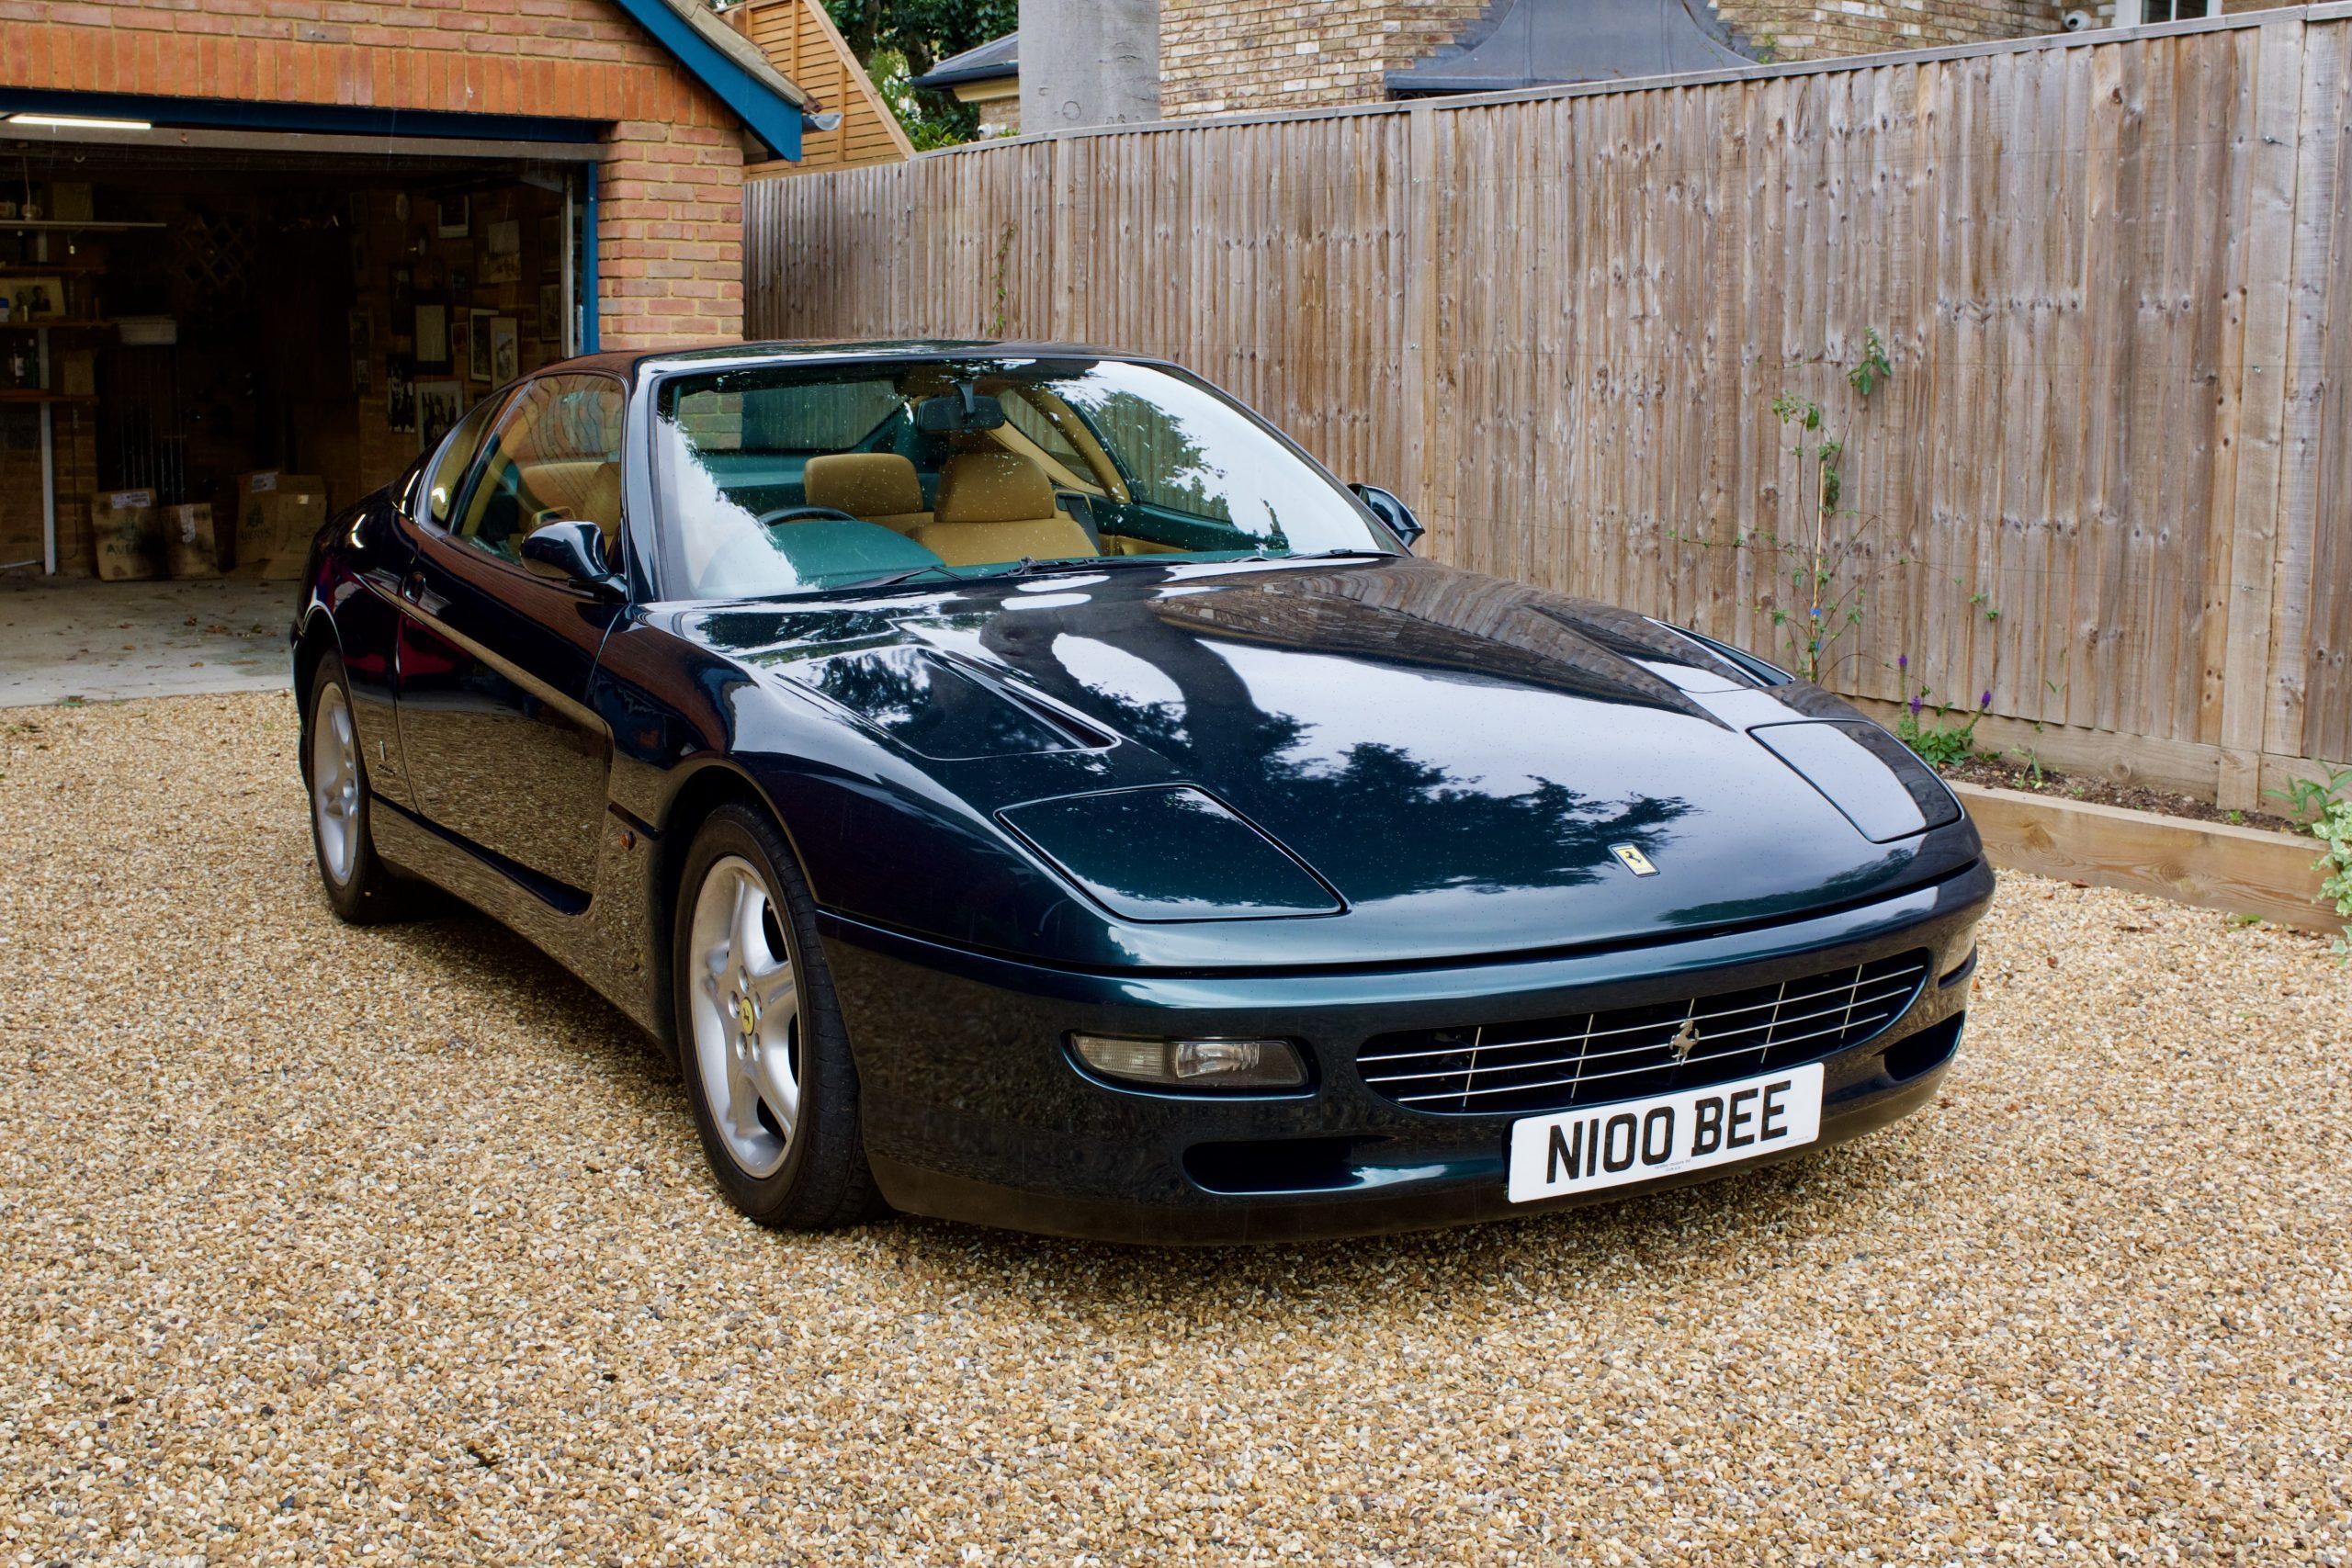 10 classic four-seat Ferraris for sale – and three wildcards